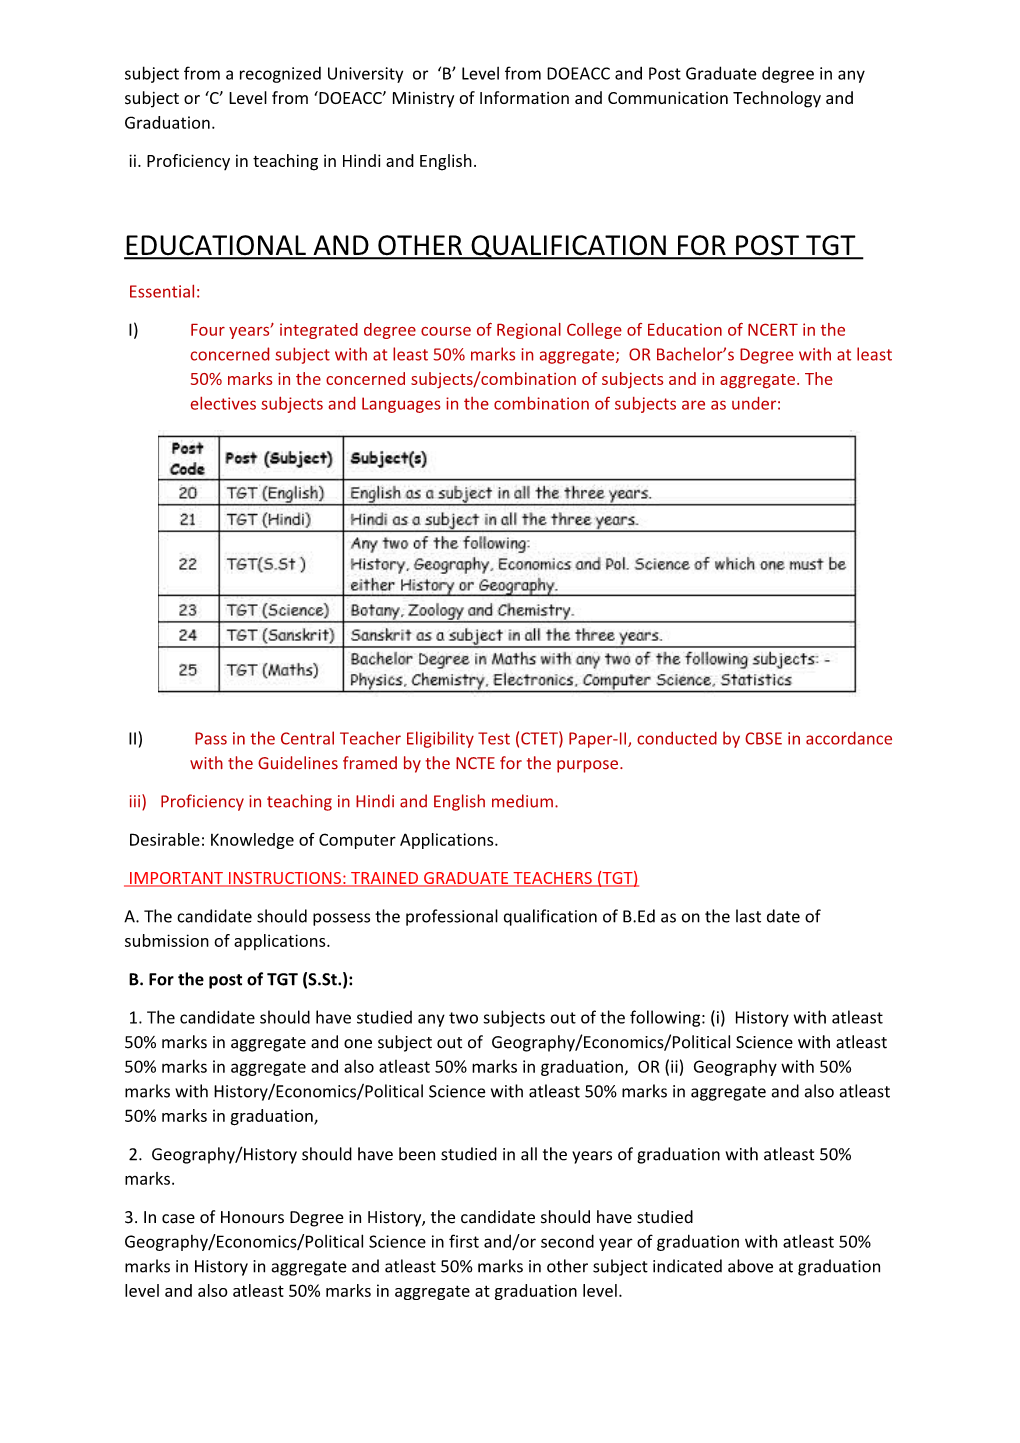 Educational and Other Qualifications Details